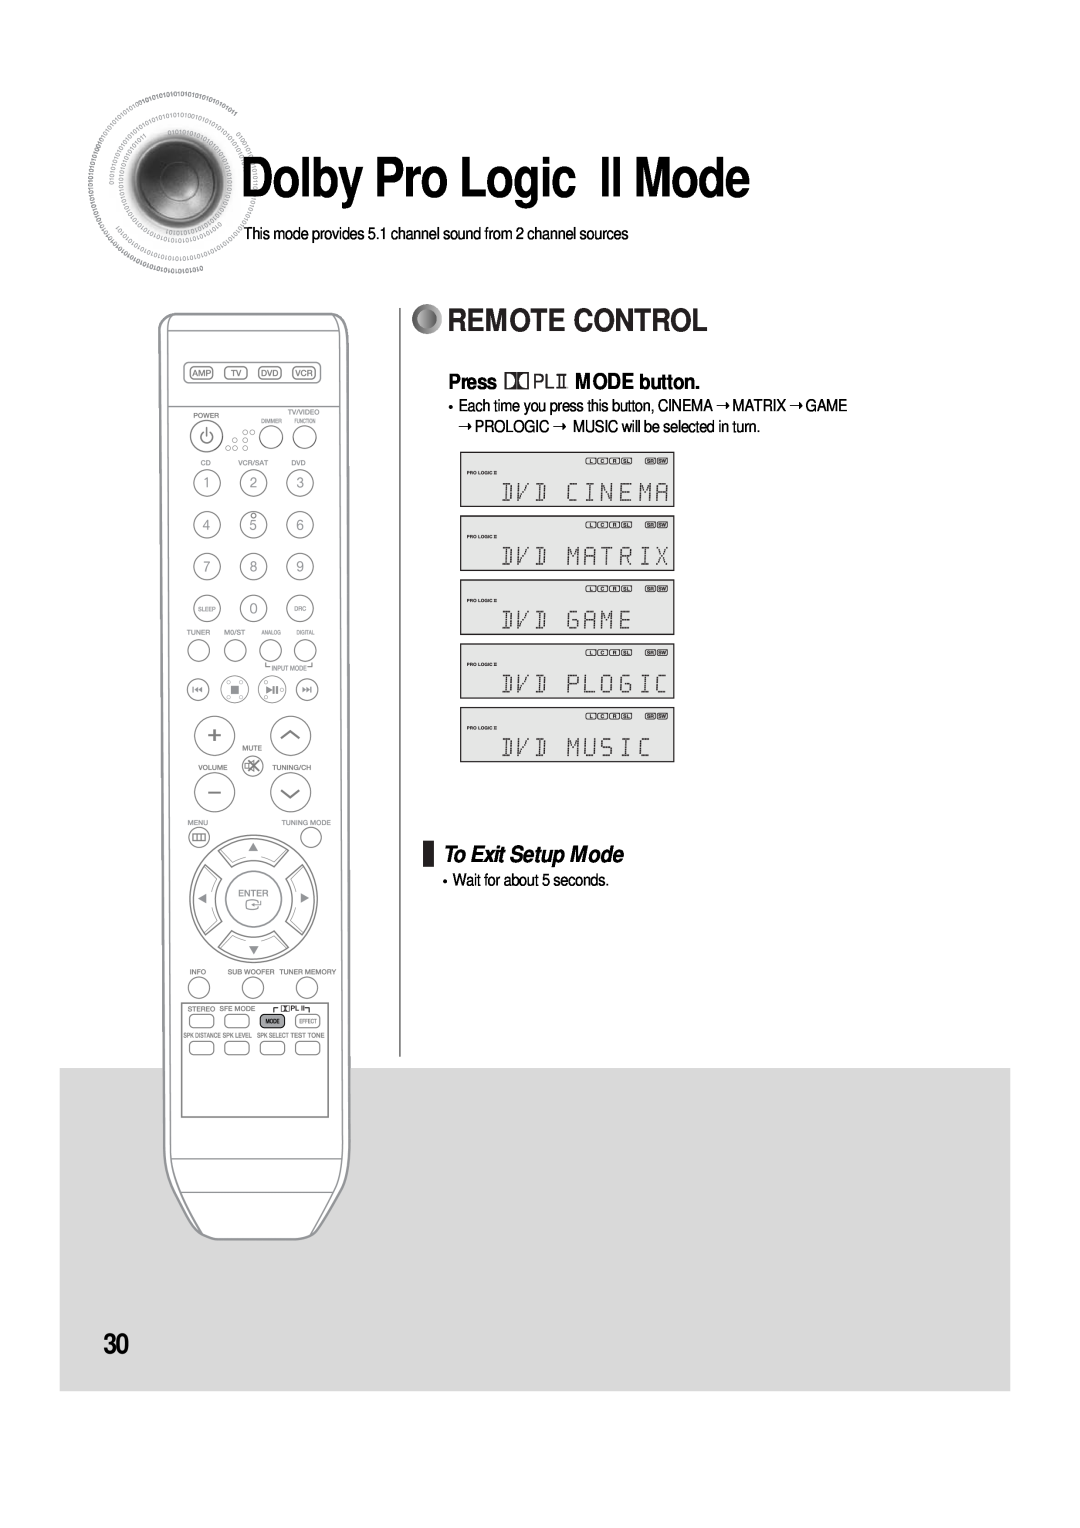 Samsung AH68-01853S, 20060510083254531 manual DolbyPro Logic ll Mode, Remote Control, To Exit Setup Mode, Press MODE button 